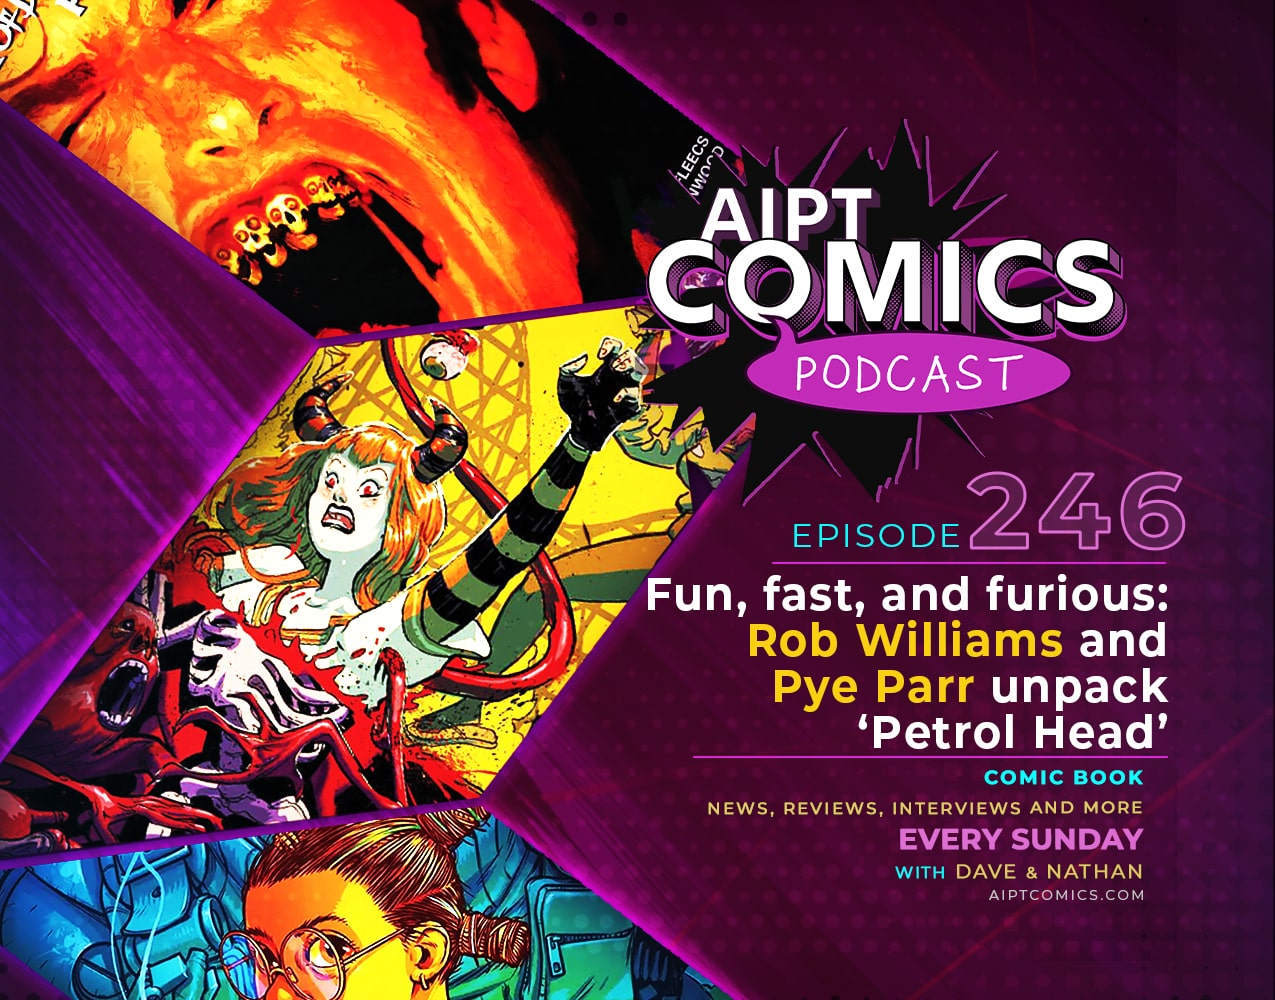 AIPT Comics Podcast Episode 246: Fun, fast, and furious: Rob Williams and Pye Parr unpack ‘Petrol Head’